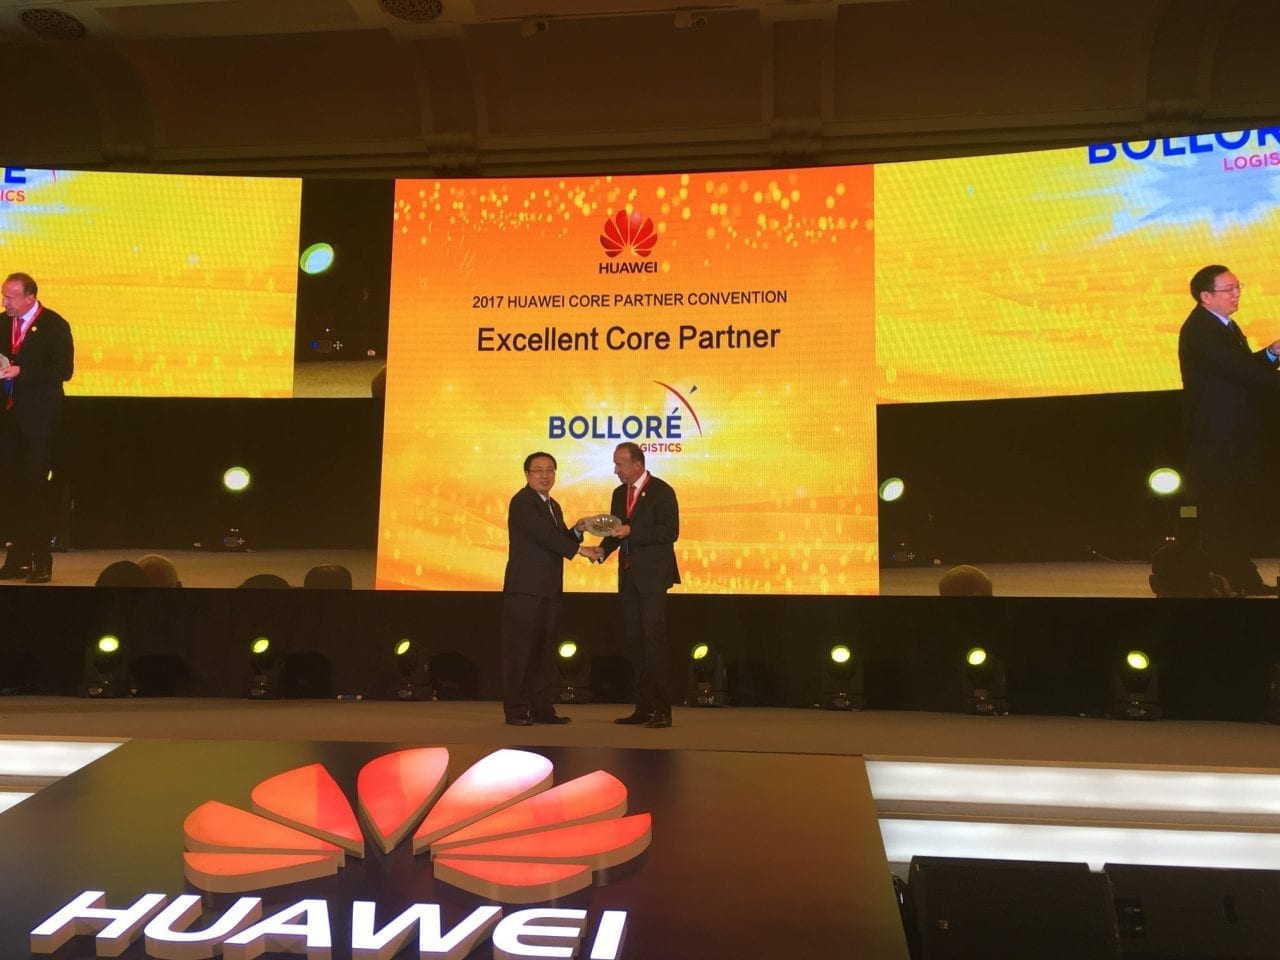 Huawei-Awards-Bolloré-Logistics-with-Two-Honors-1280x960.jpg